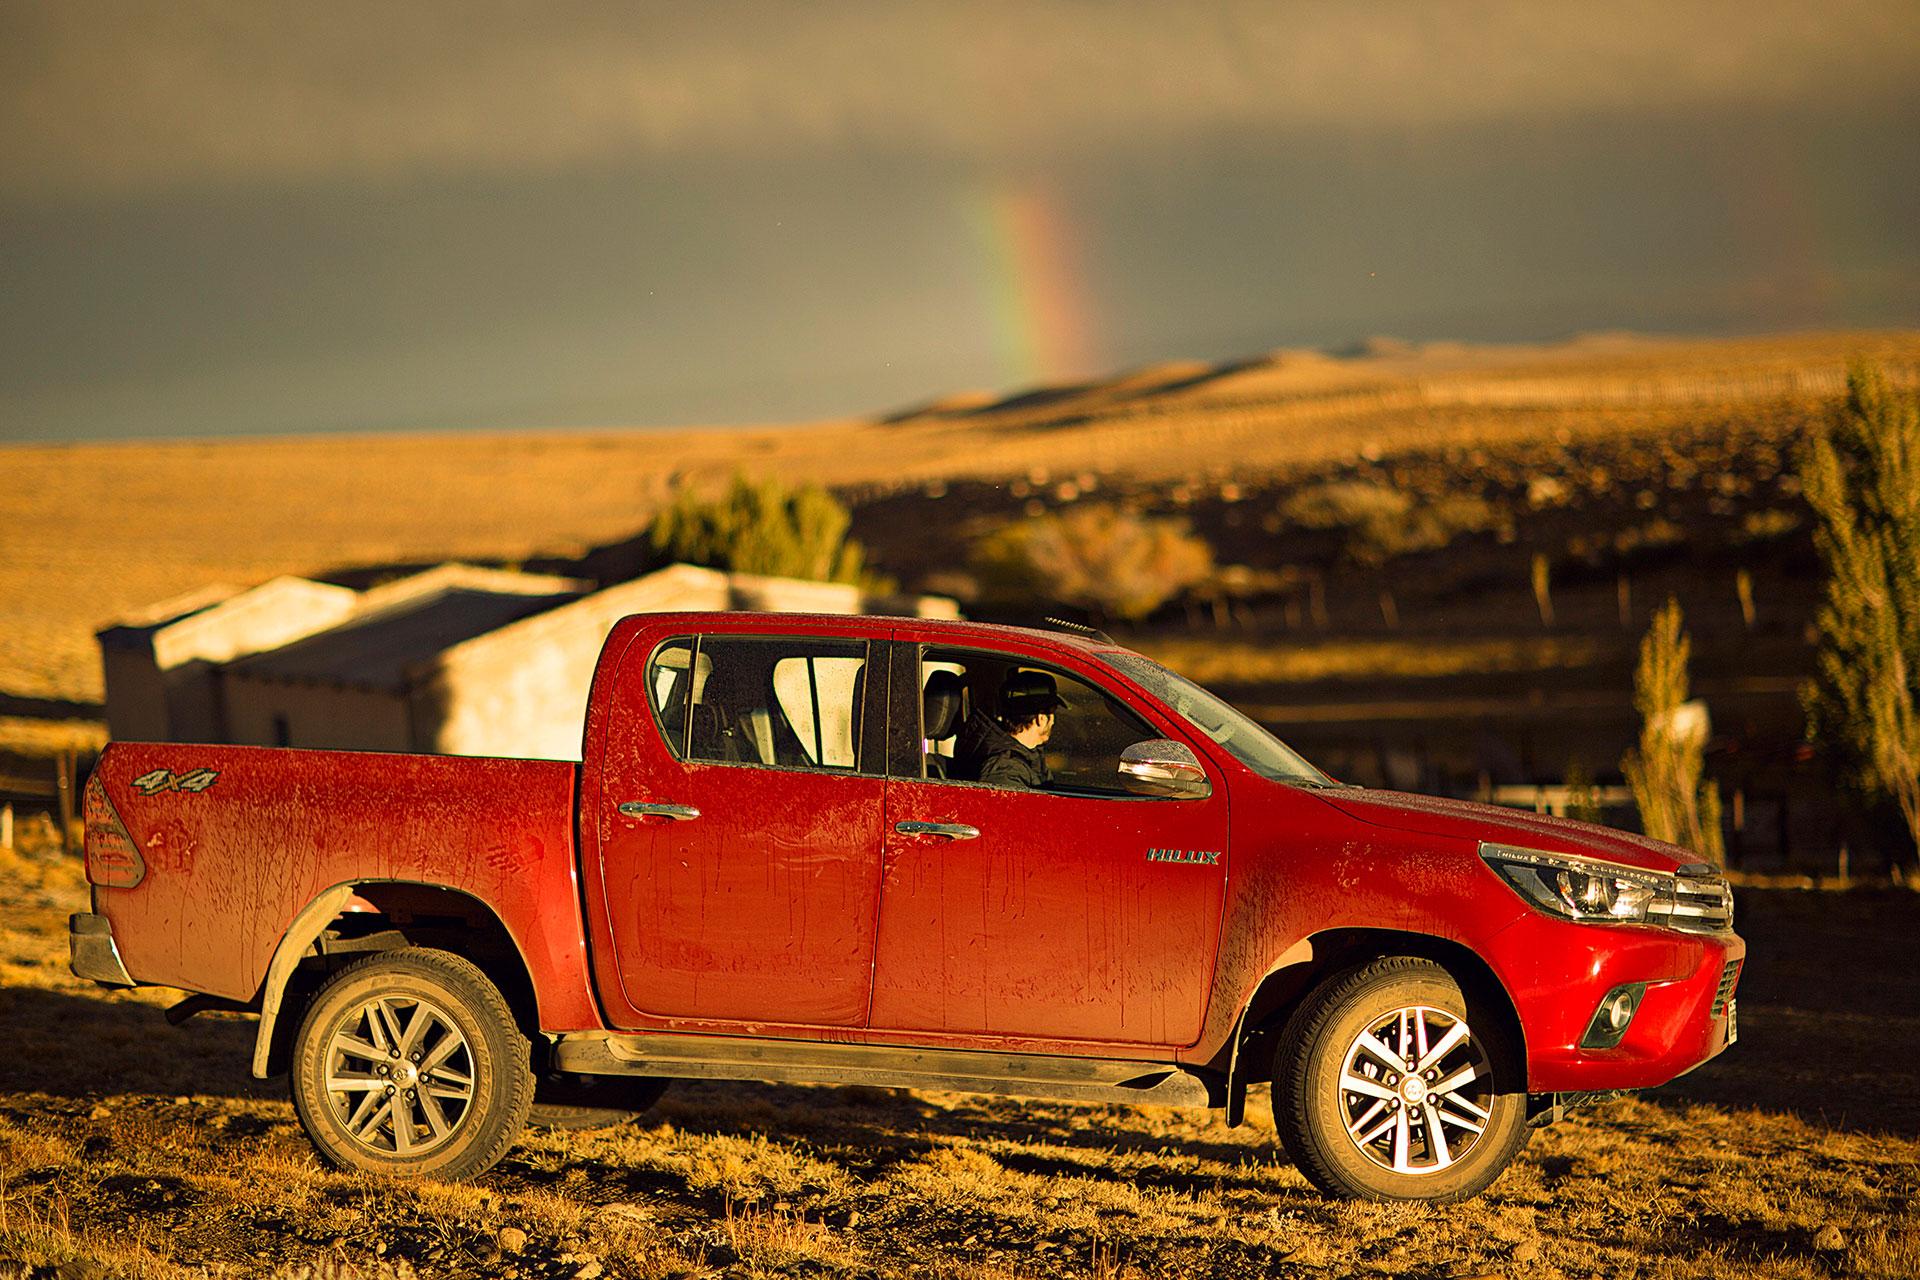 The Toyota Hilux isn’t available in the U.S.